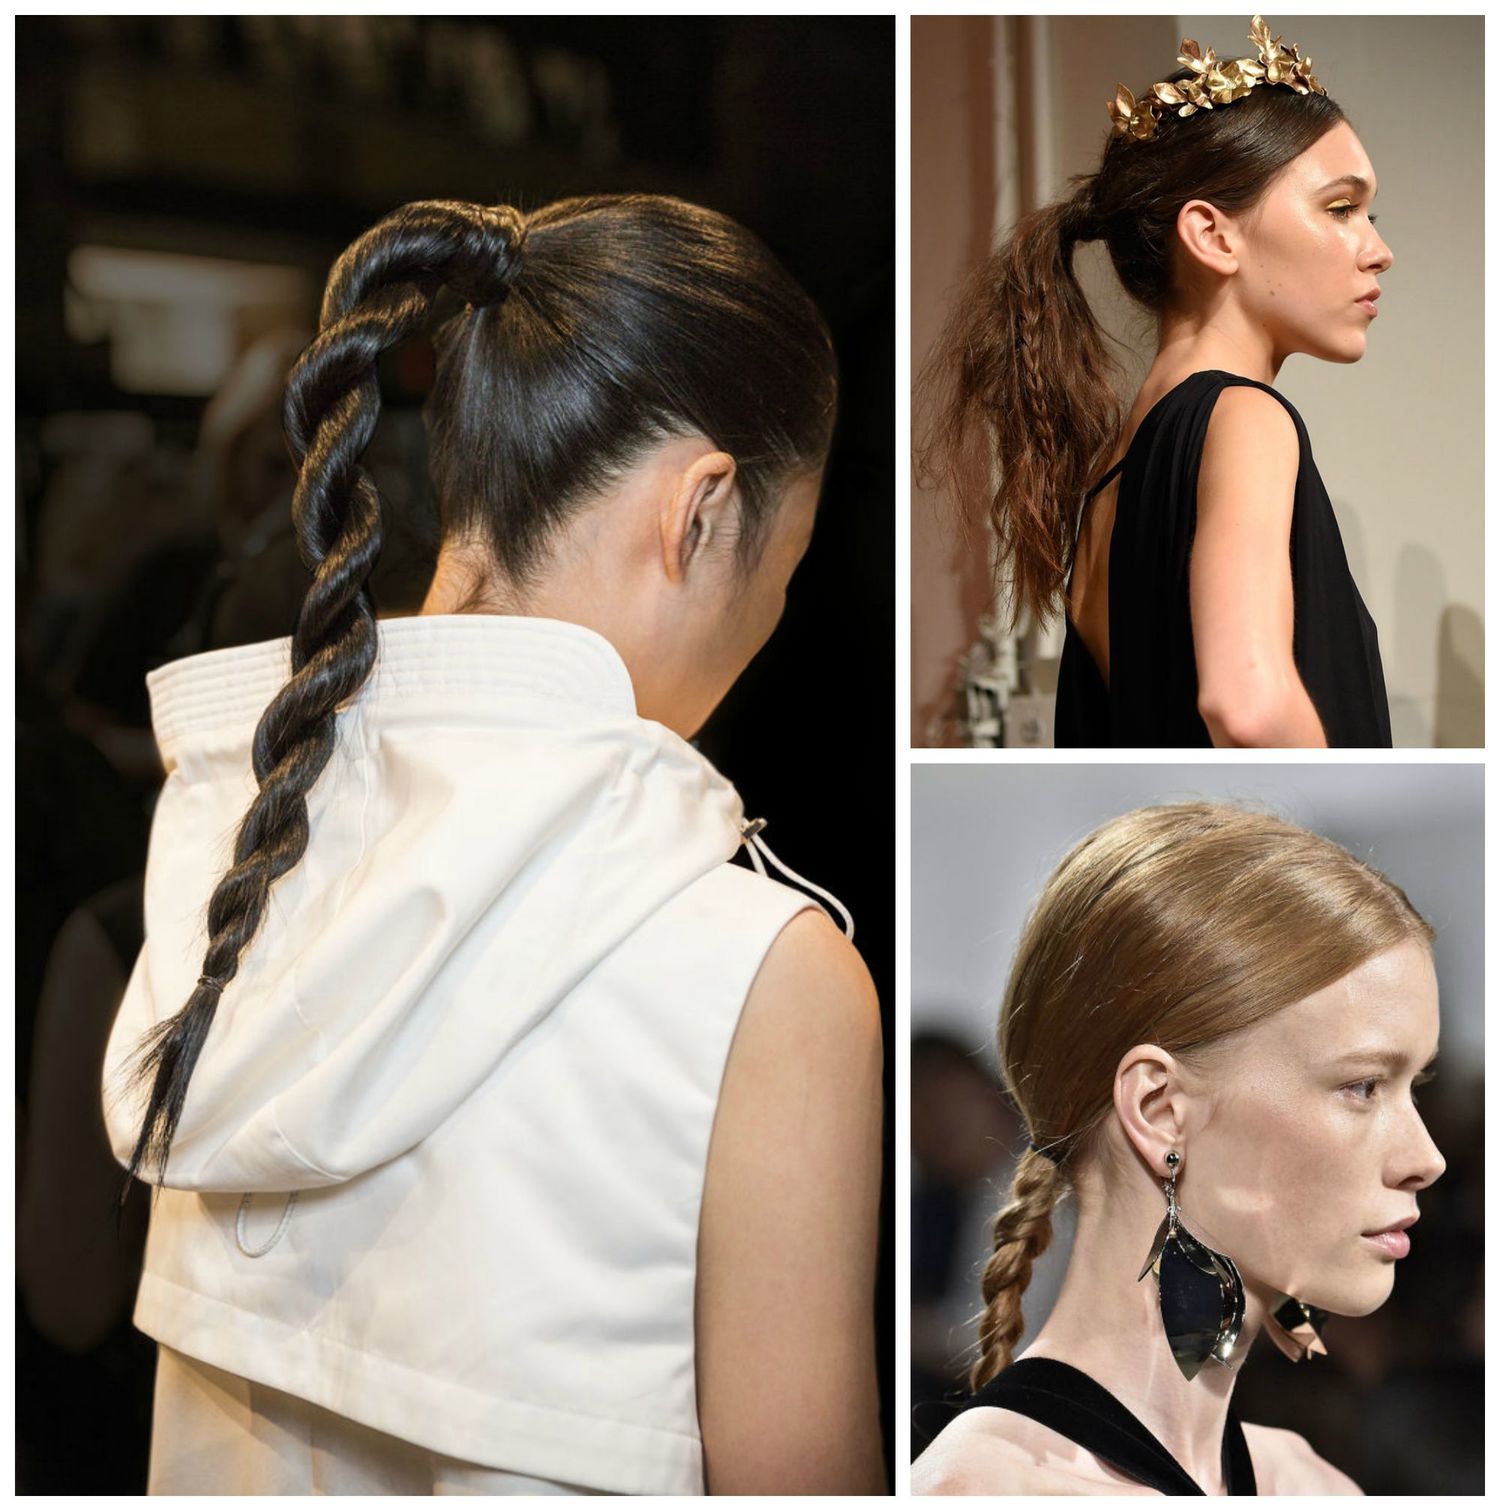 Hair Trends for 2016